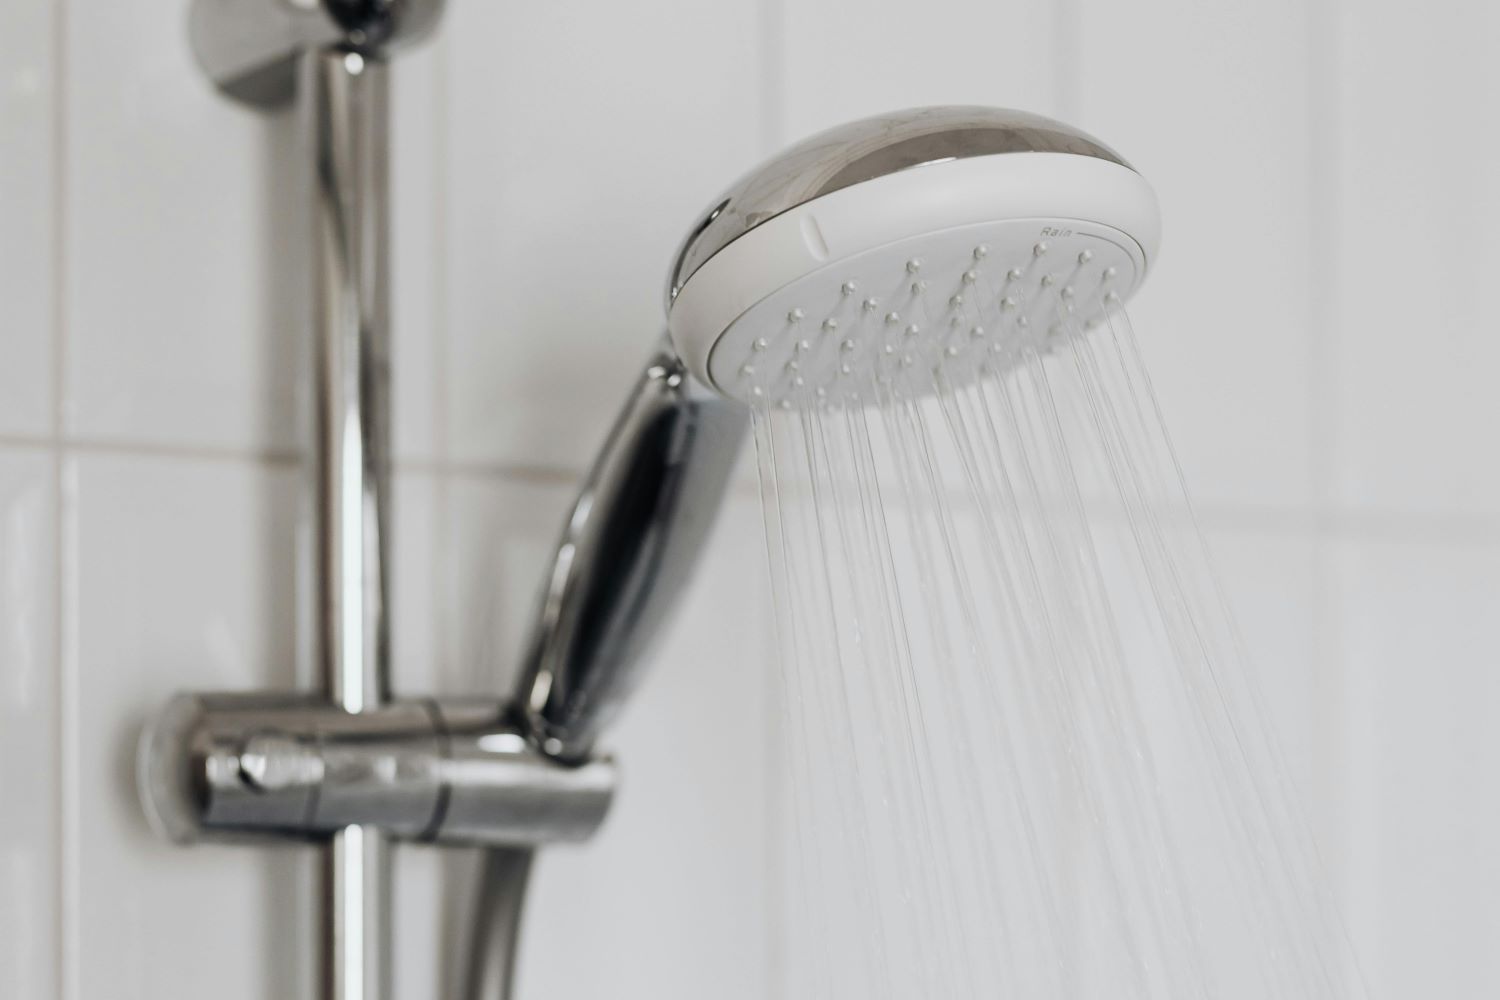 Photo of a Shower Head